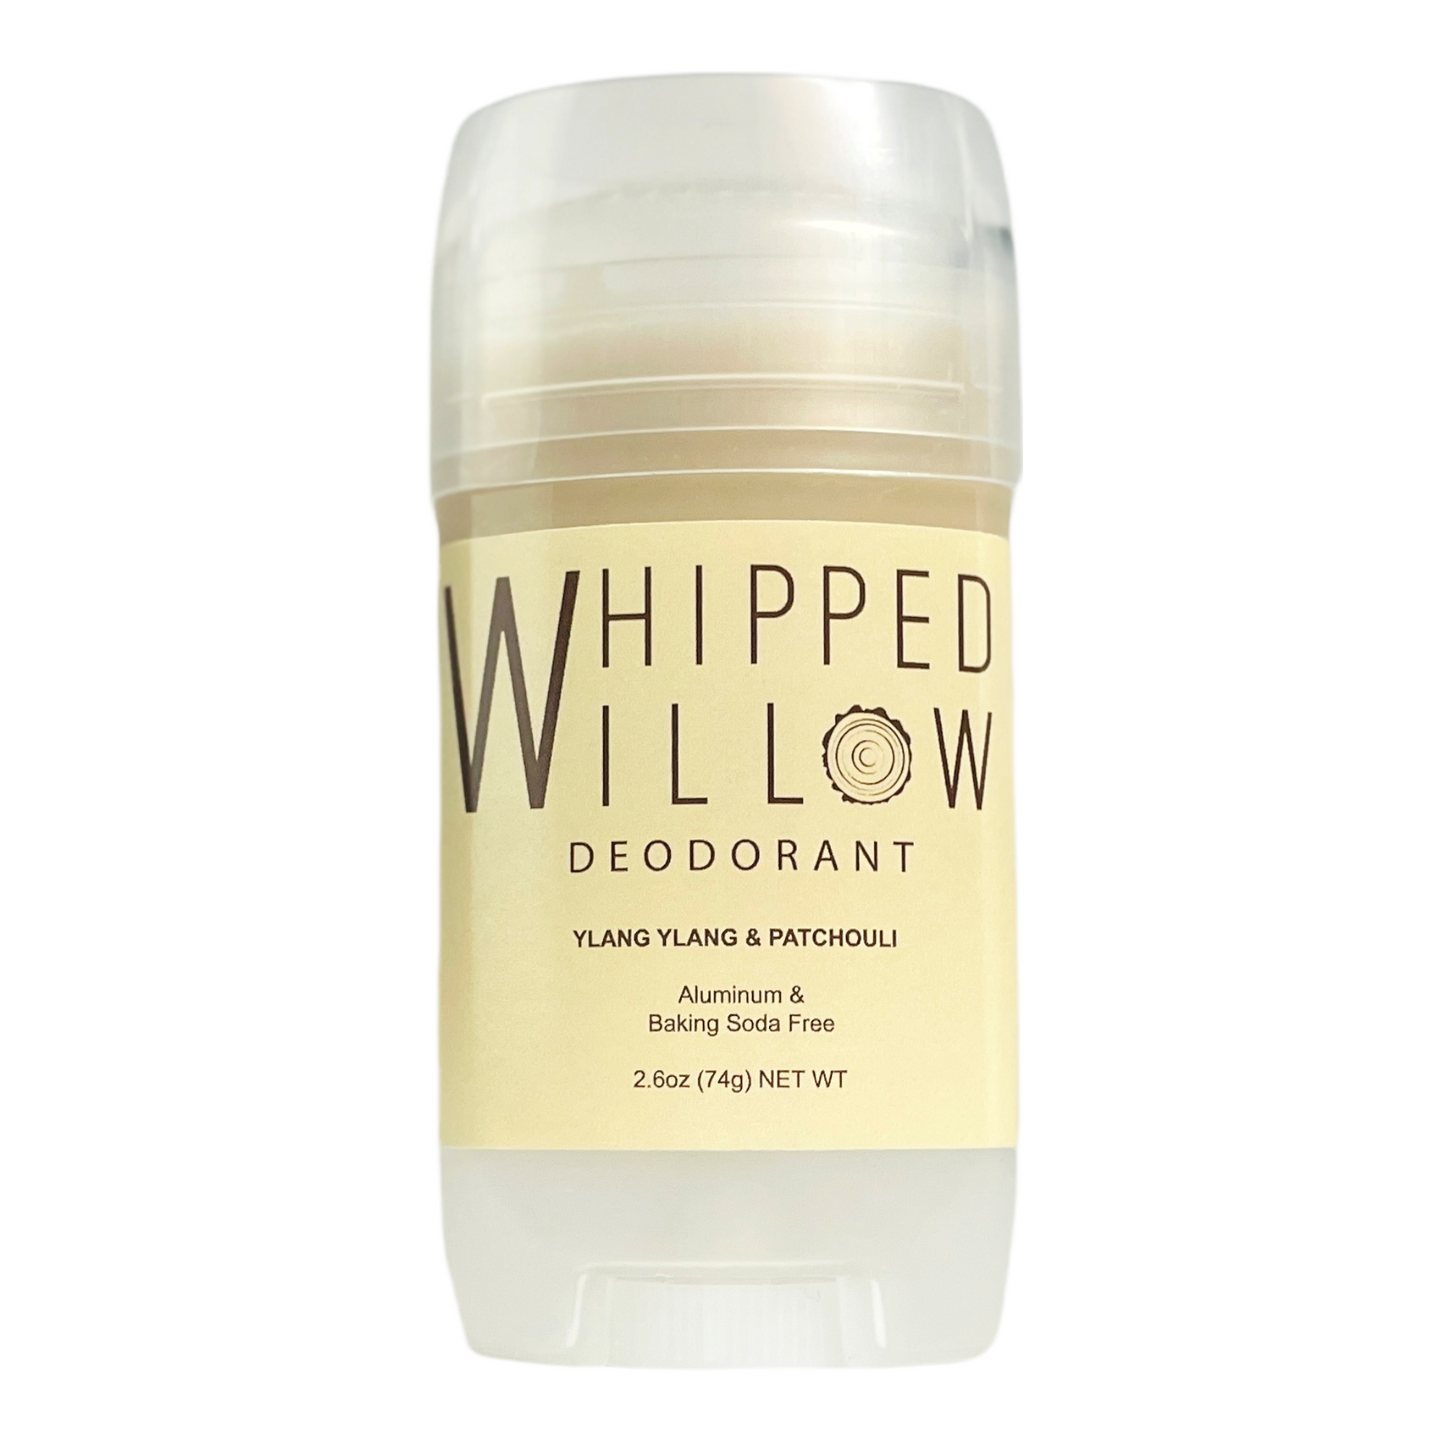 Whipped Willow Ylang Ylang Patchouli natural deodorant stick